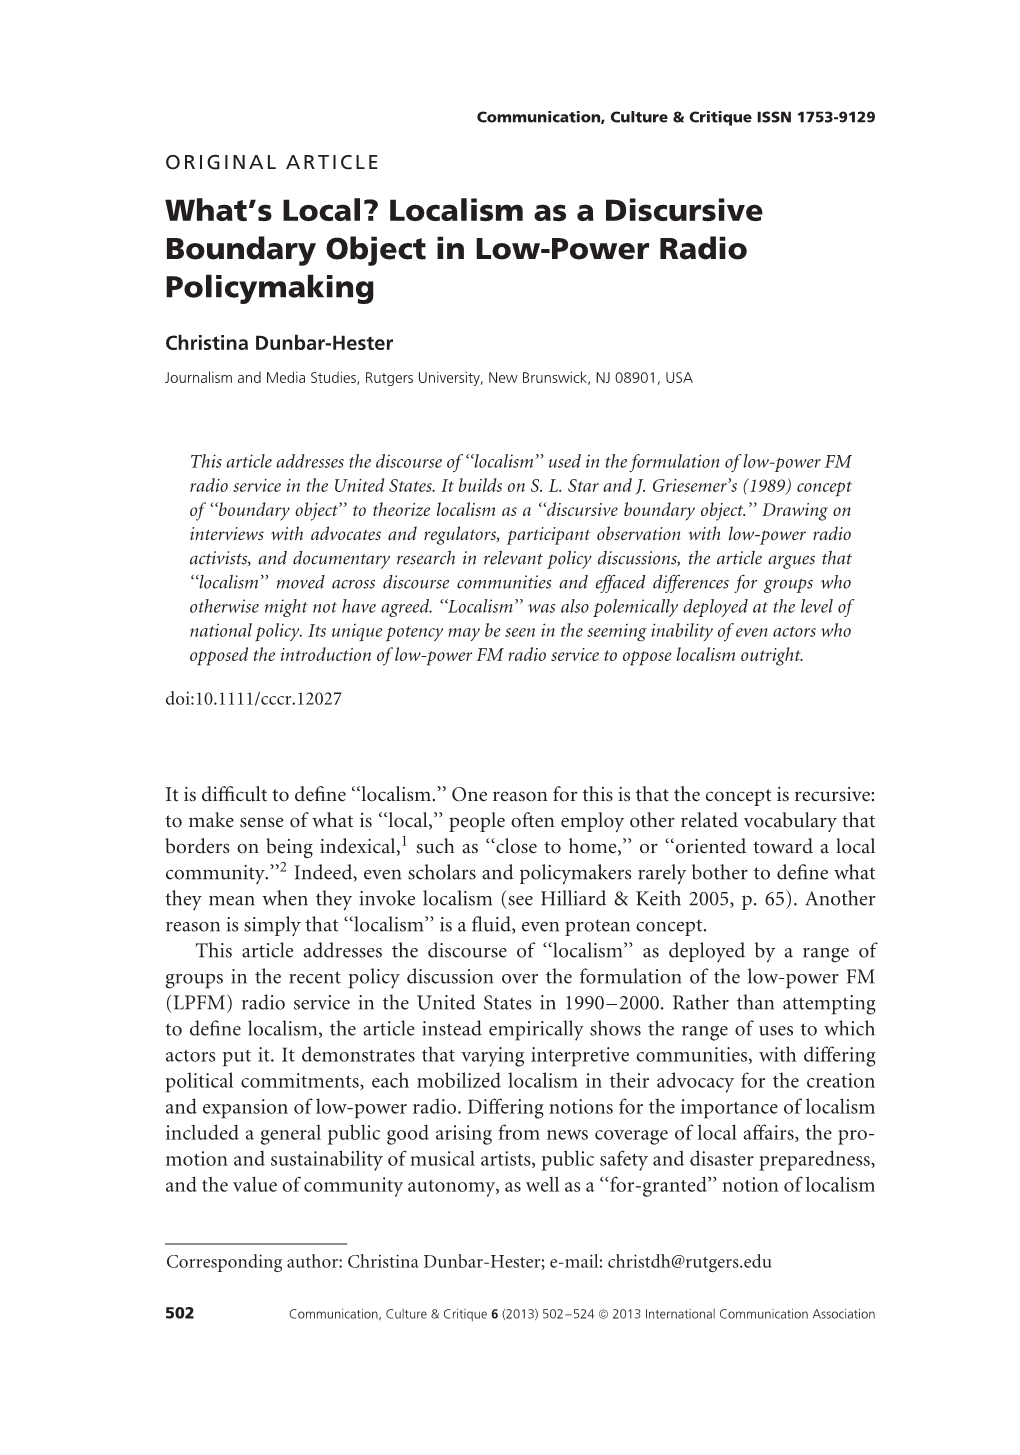 Localism As a Discursive Boundary Object in Low-Power Radio Policymaking